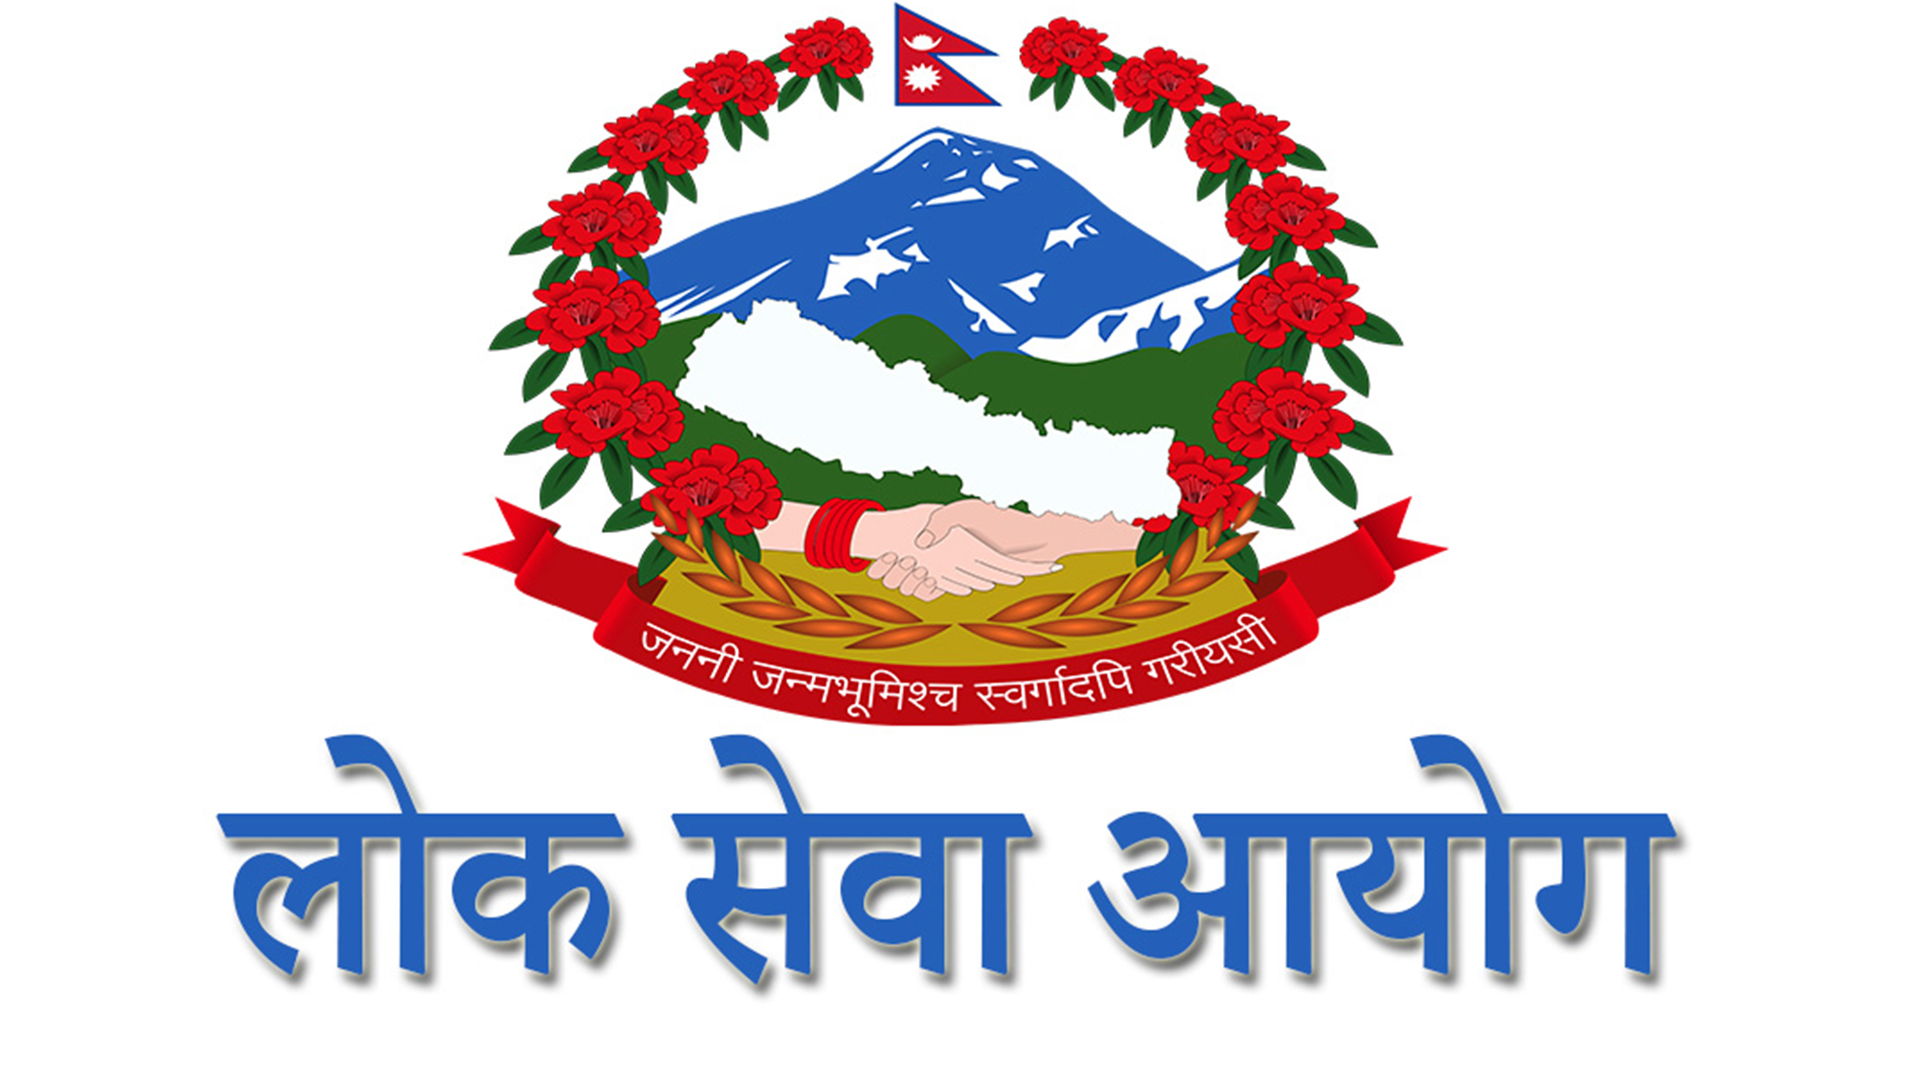 Lok Sewa Advertises for Vacancies in almost 300 Technical Posts